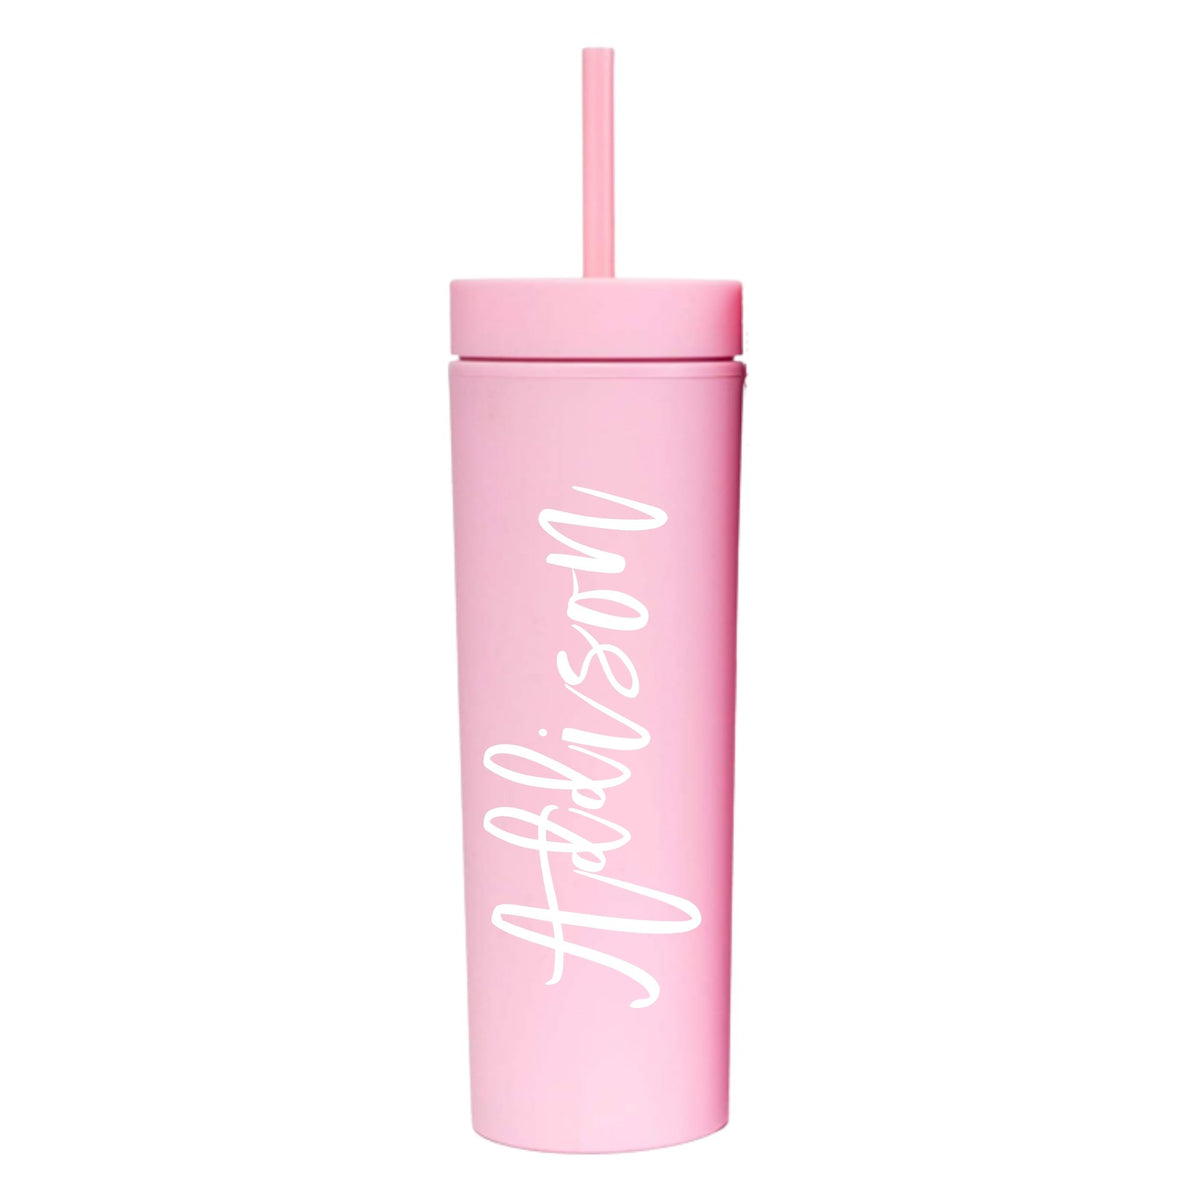 Monogrammed 16 OZ. Acrylic Tumbler with Lid and Straw – Preppy Monogrammed  Gifts